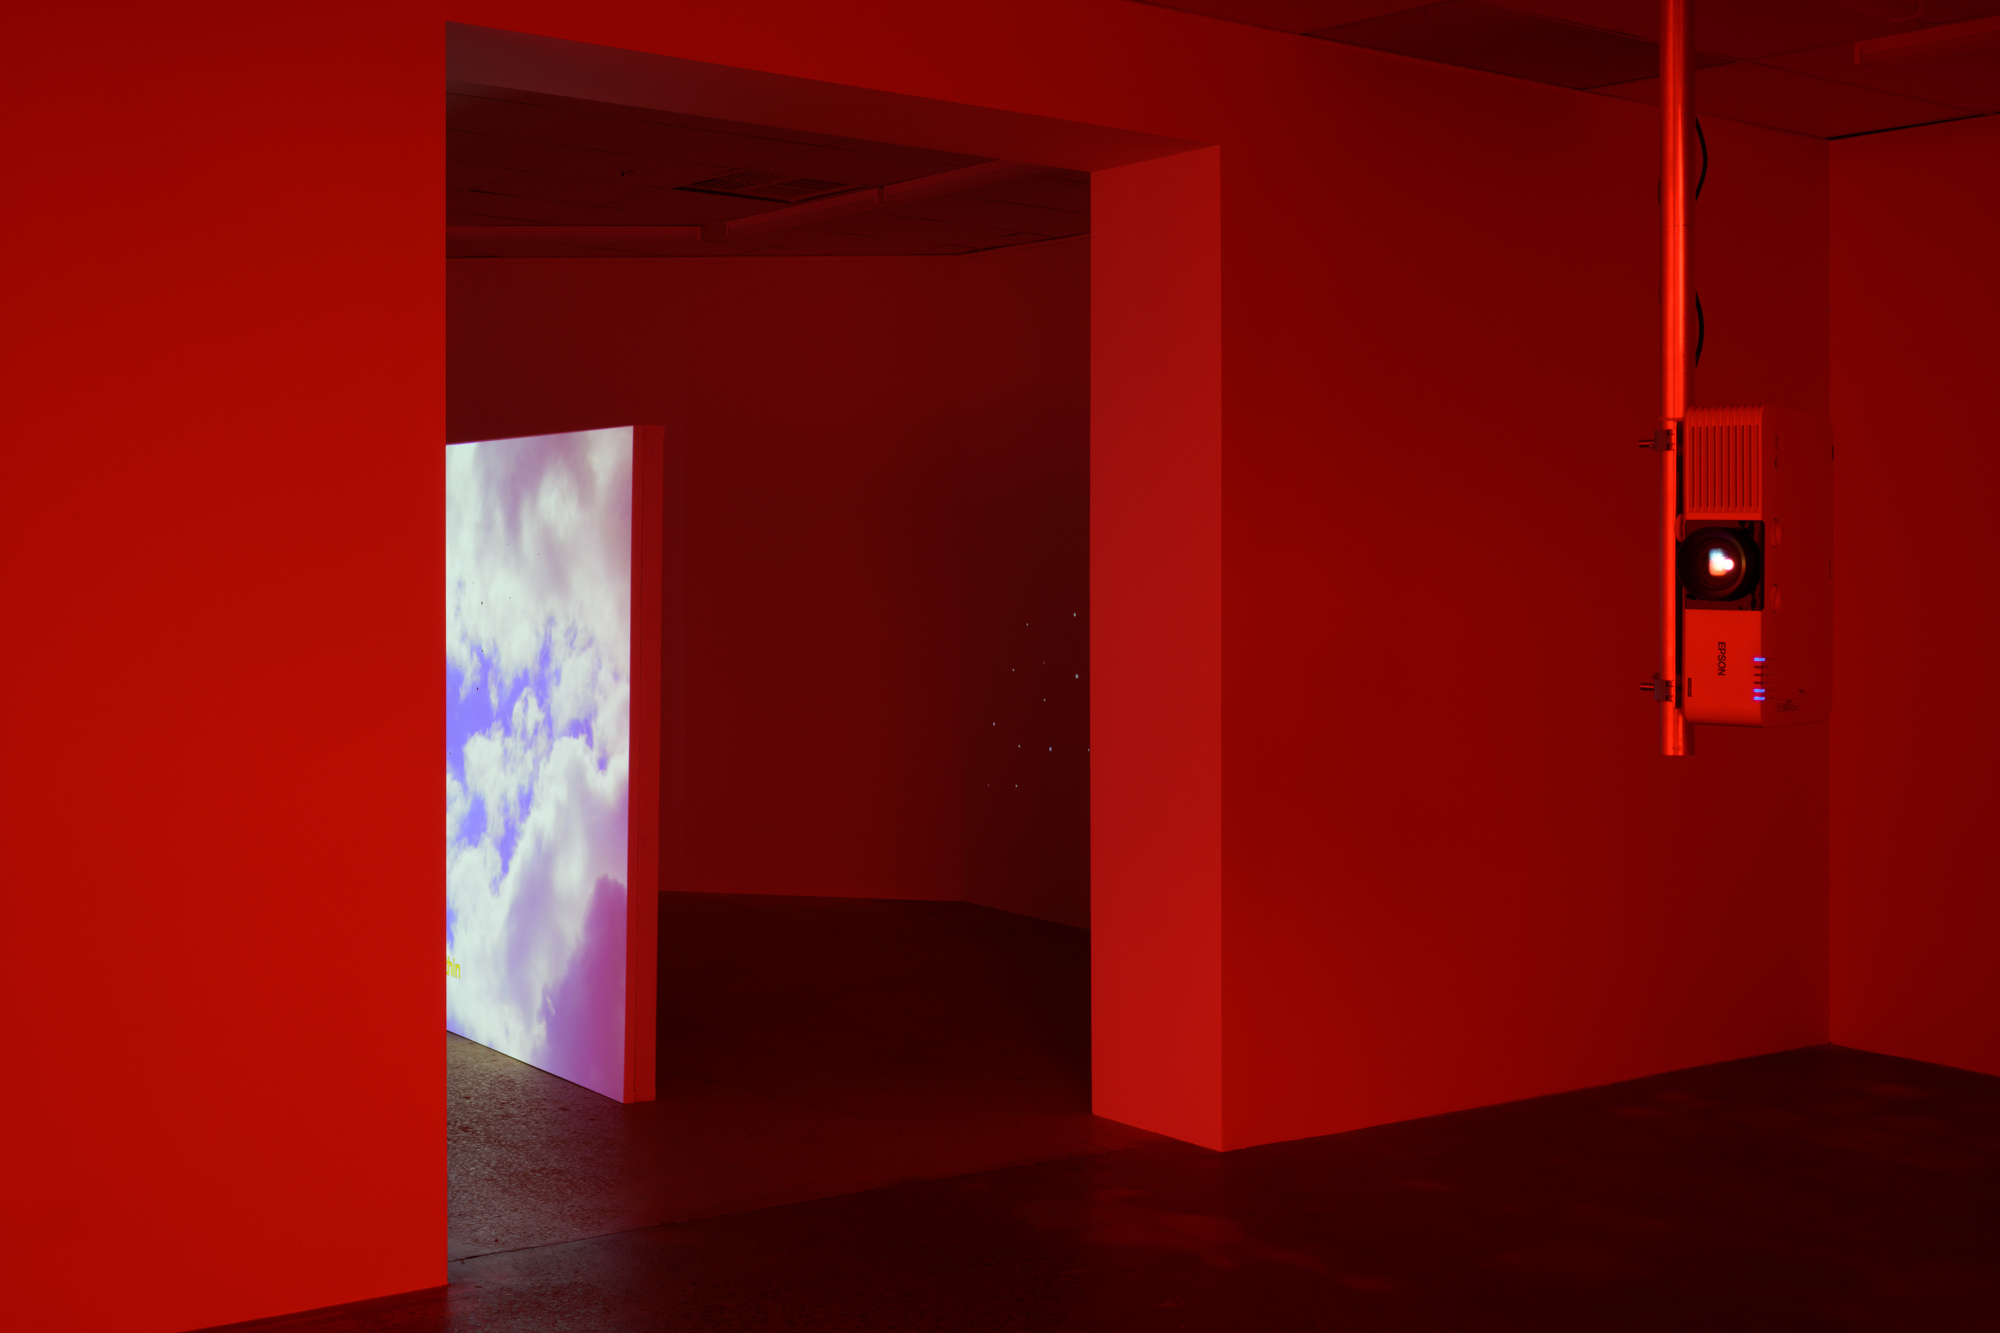 Installation view: 'We touch the sun, stars and everywhere at once' single channel projection